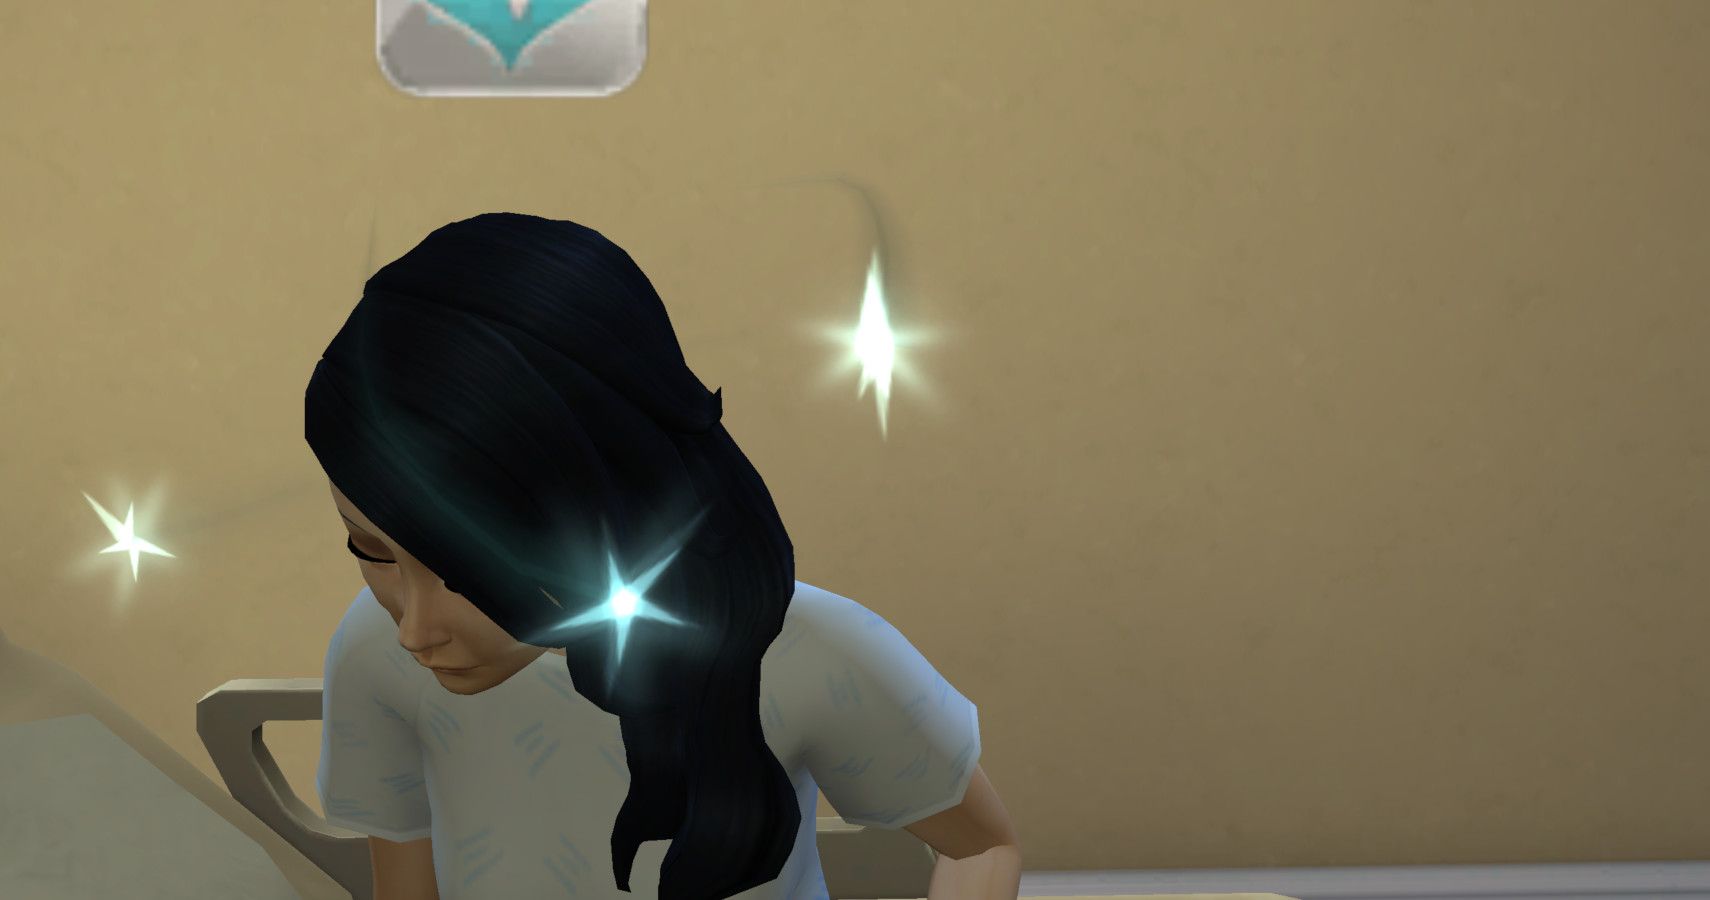 A sim with dizziness and stars